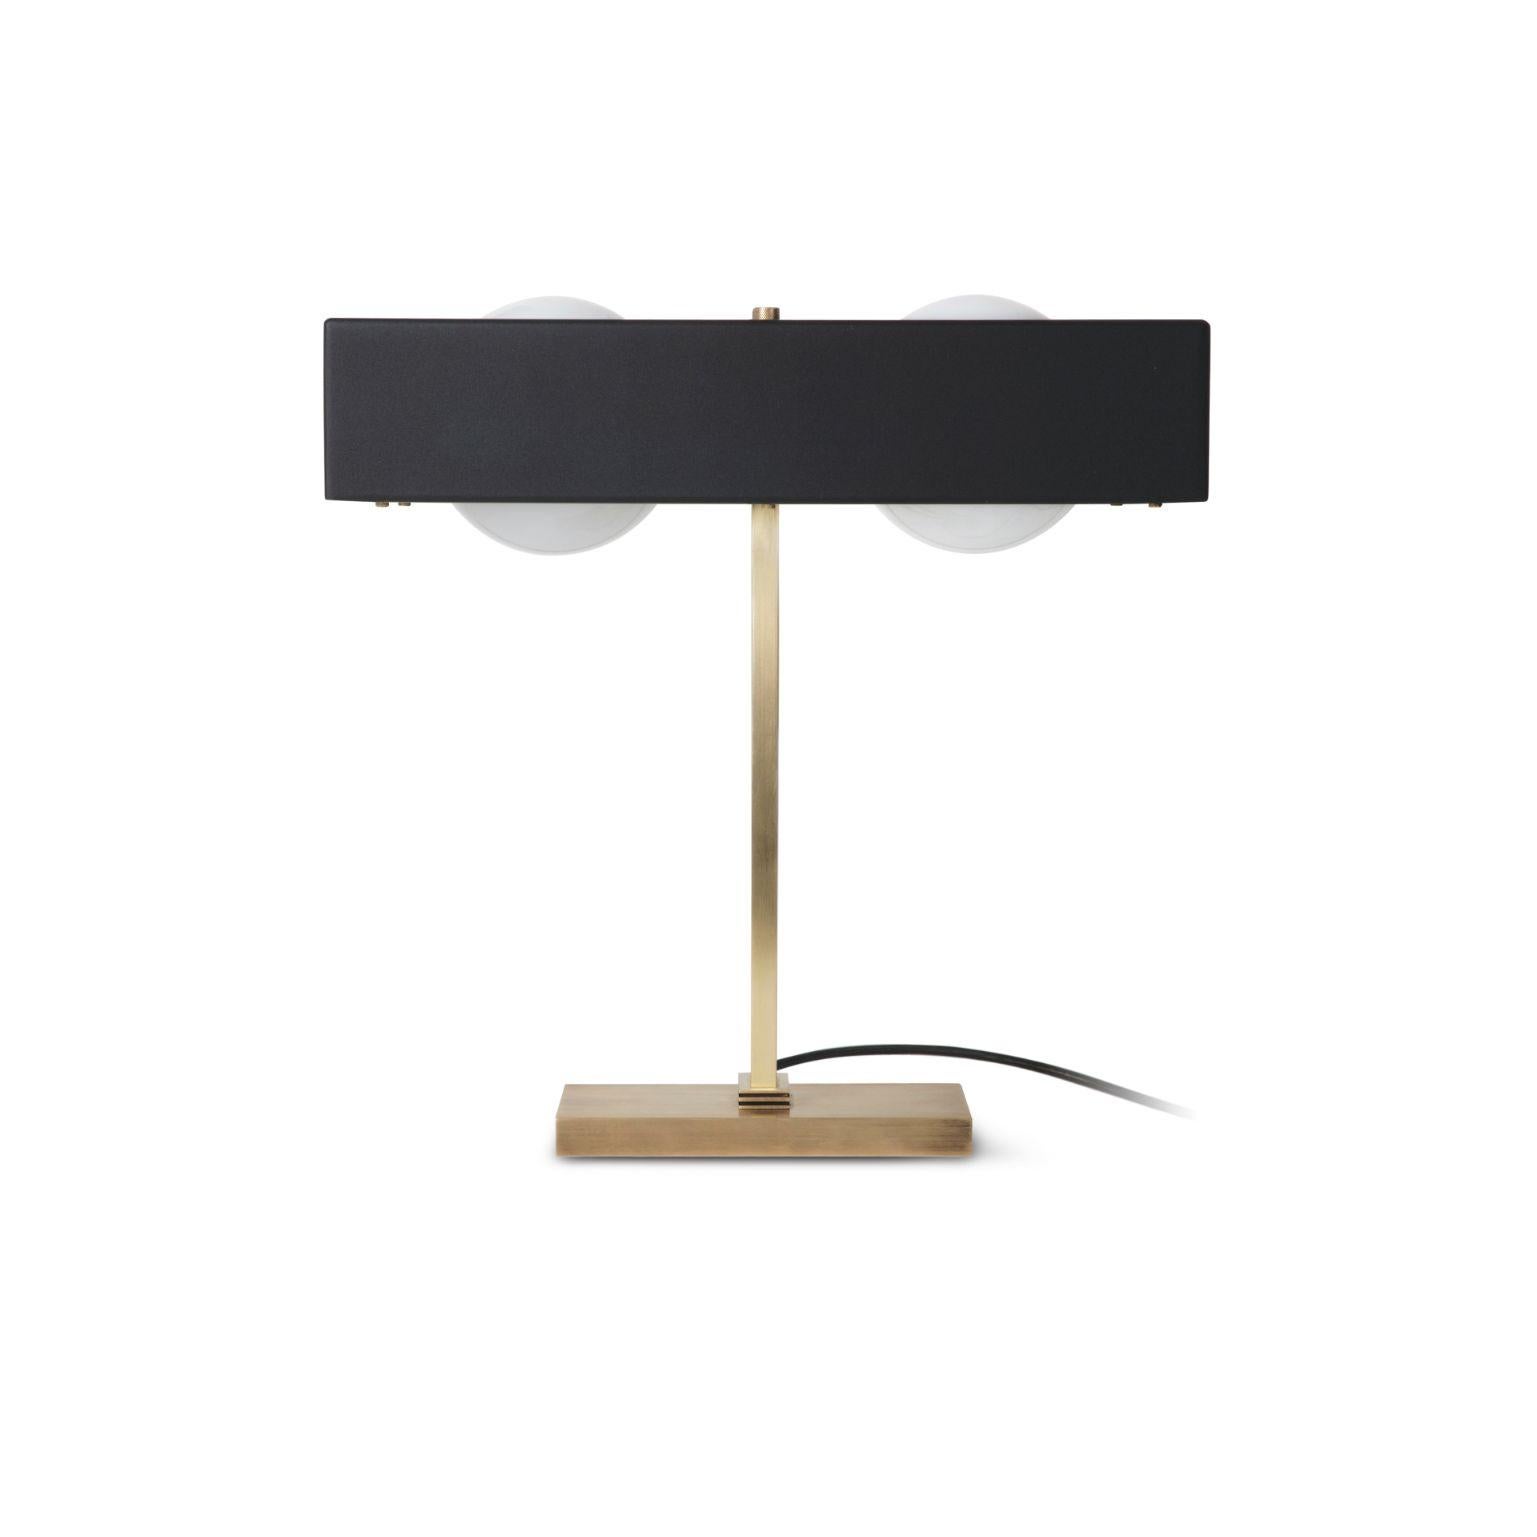 Kernae table light - Black by Bert Frank
Dimensions: 41.5 x 40 x 24 cm
Materials: Brass, steel

Brushed brass lacquered as standard, custom finishes available.

When Adam Yeats and Robbie Llewellyn founded Bert Frank in 2013 it was a meeting of